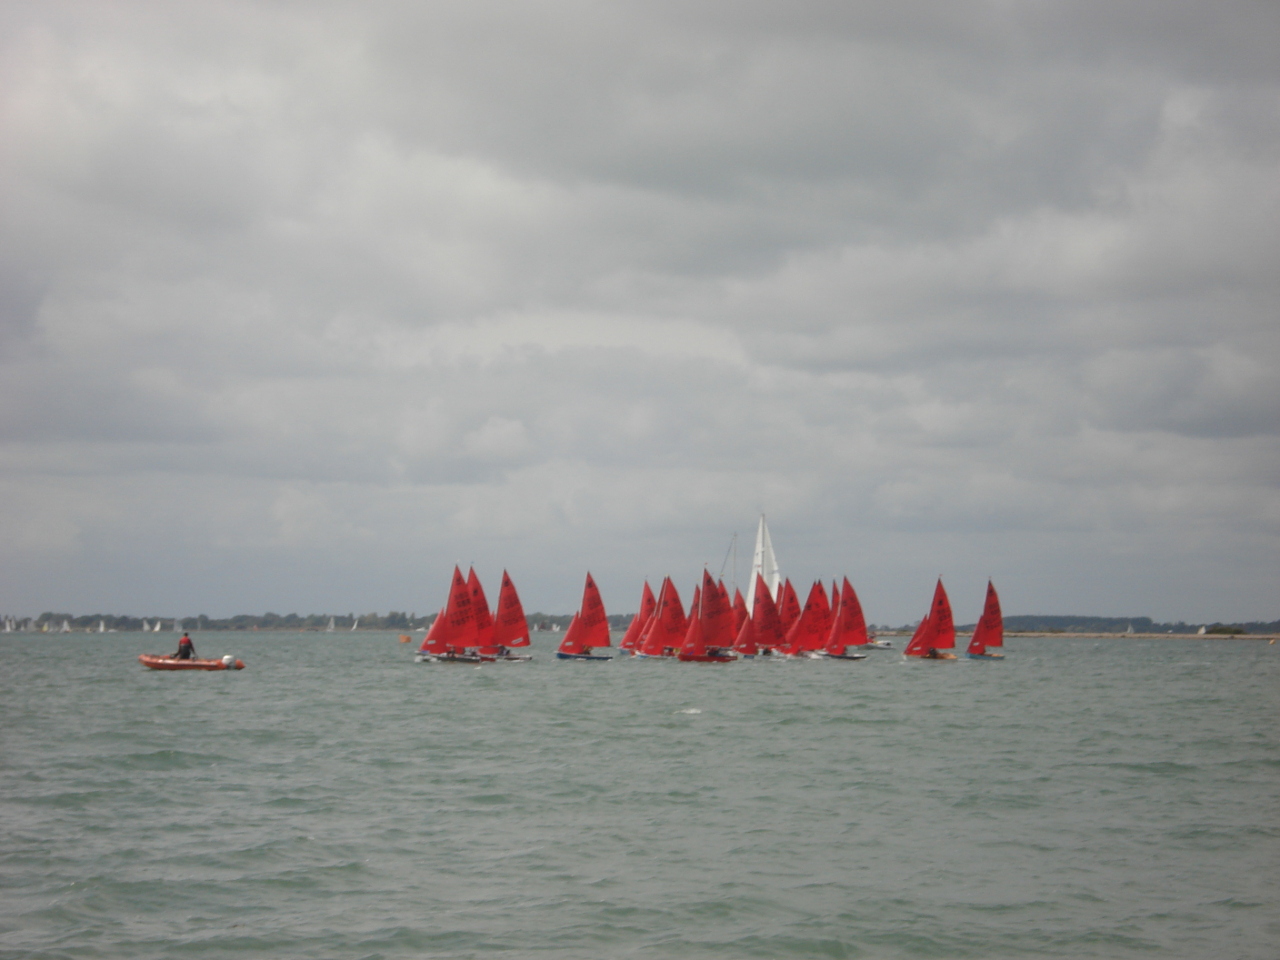 A fleet of Mirror dinghies starting a race in the distance under a cloudy sky